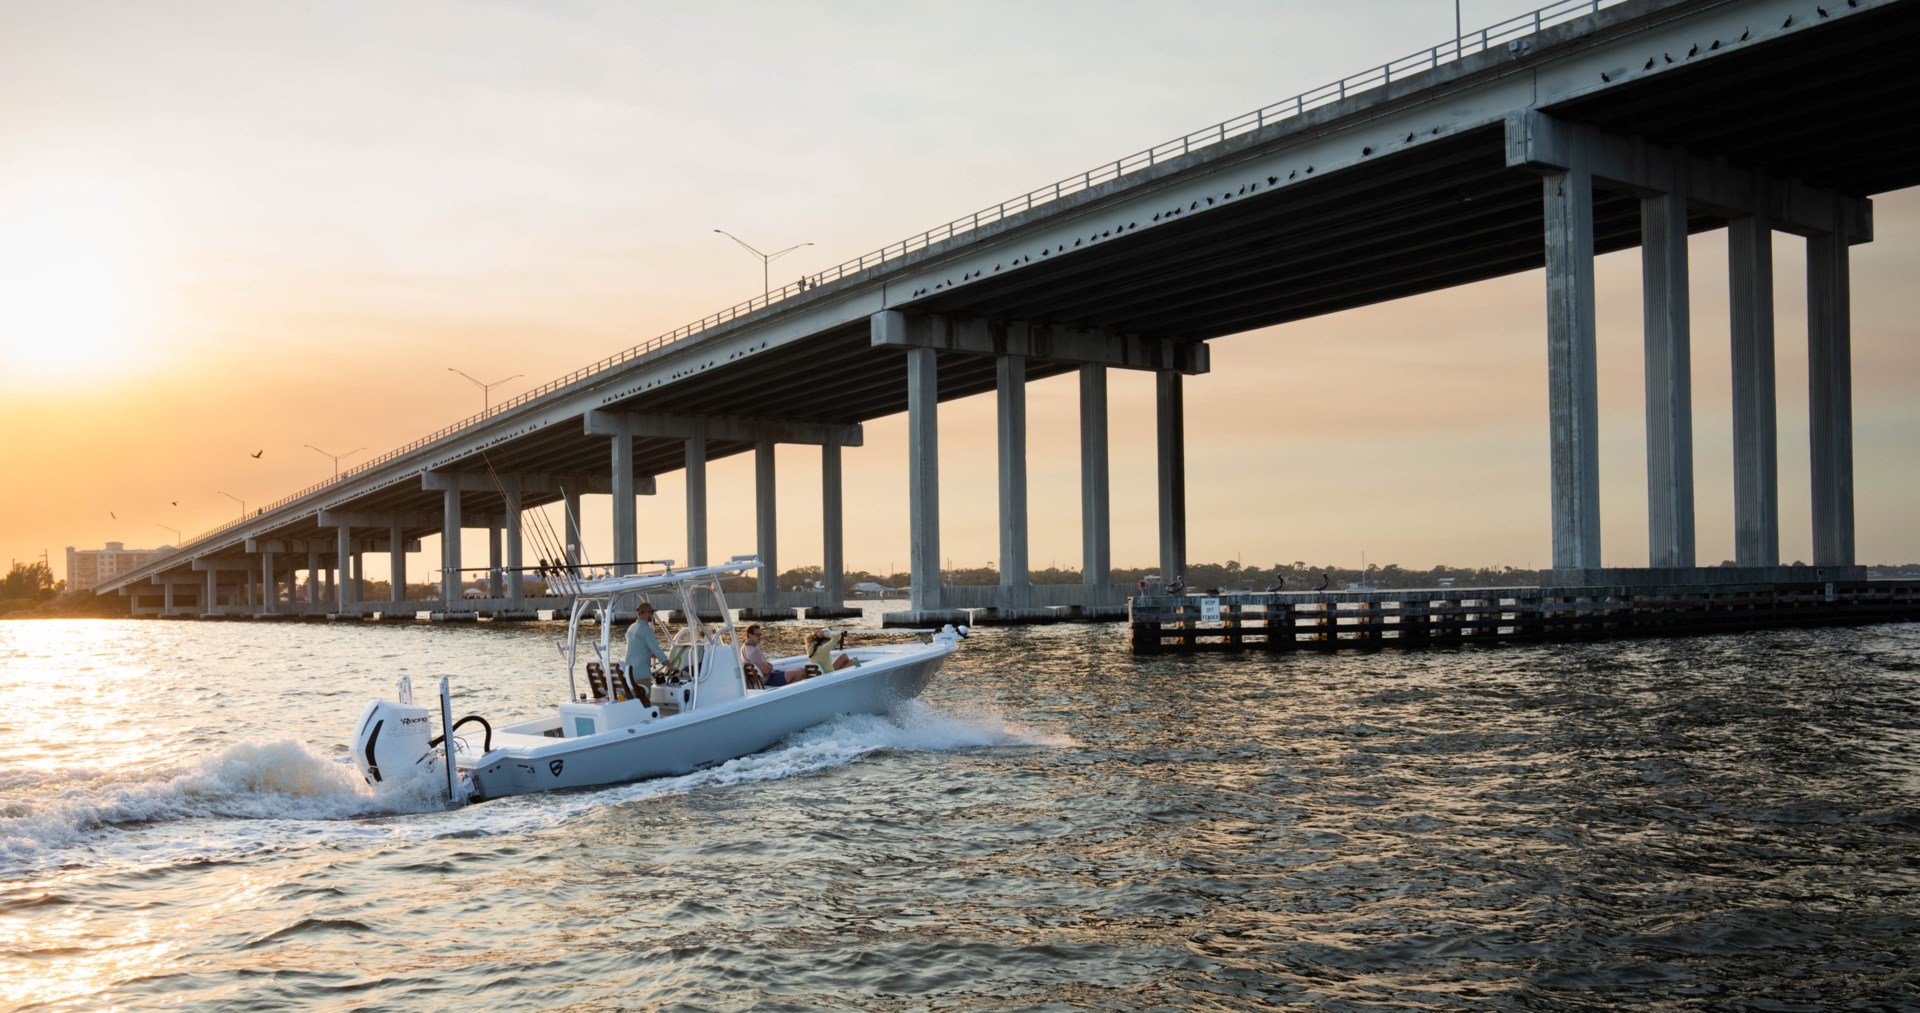 A white center console fishing boat passing under a bridge with a setting sun in the background